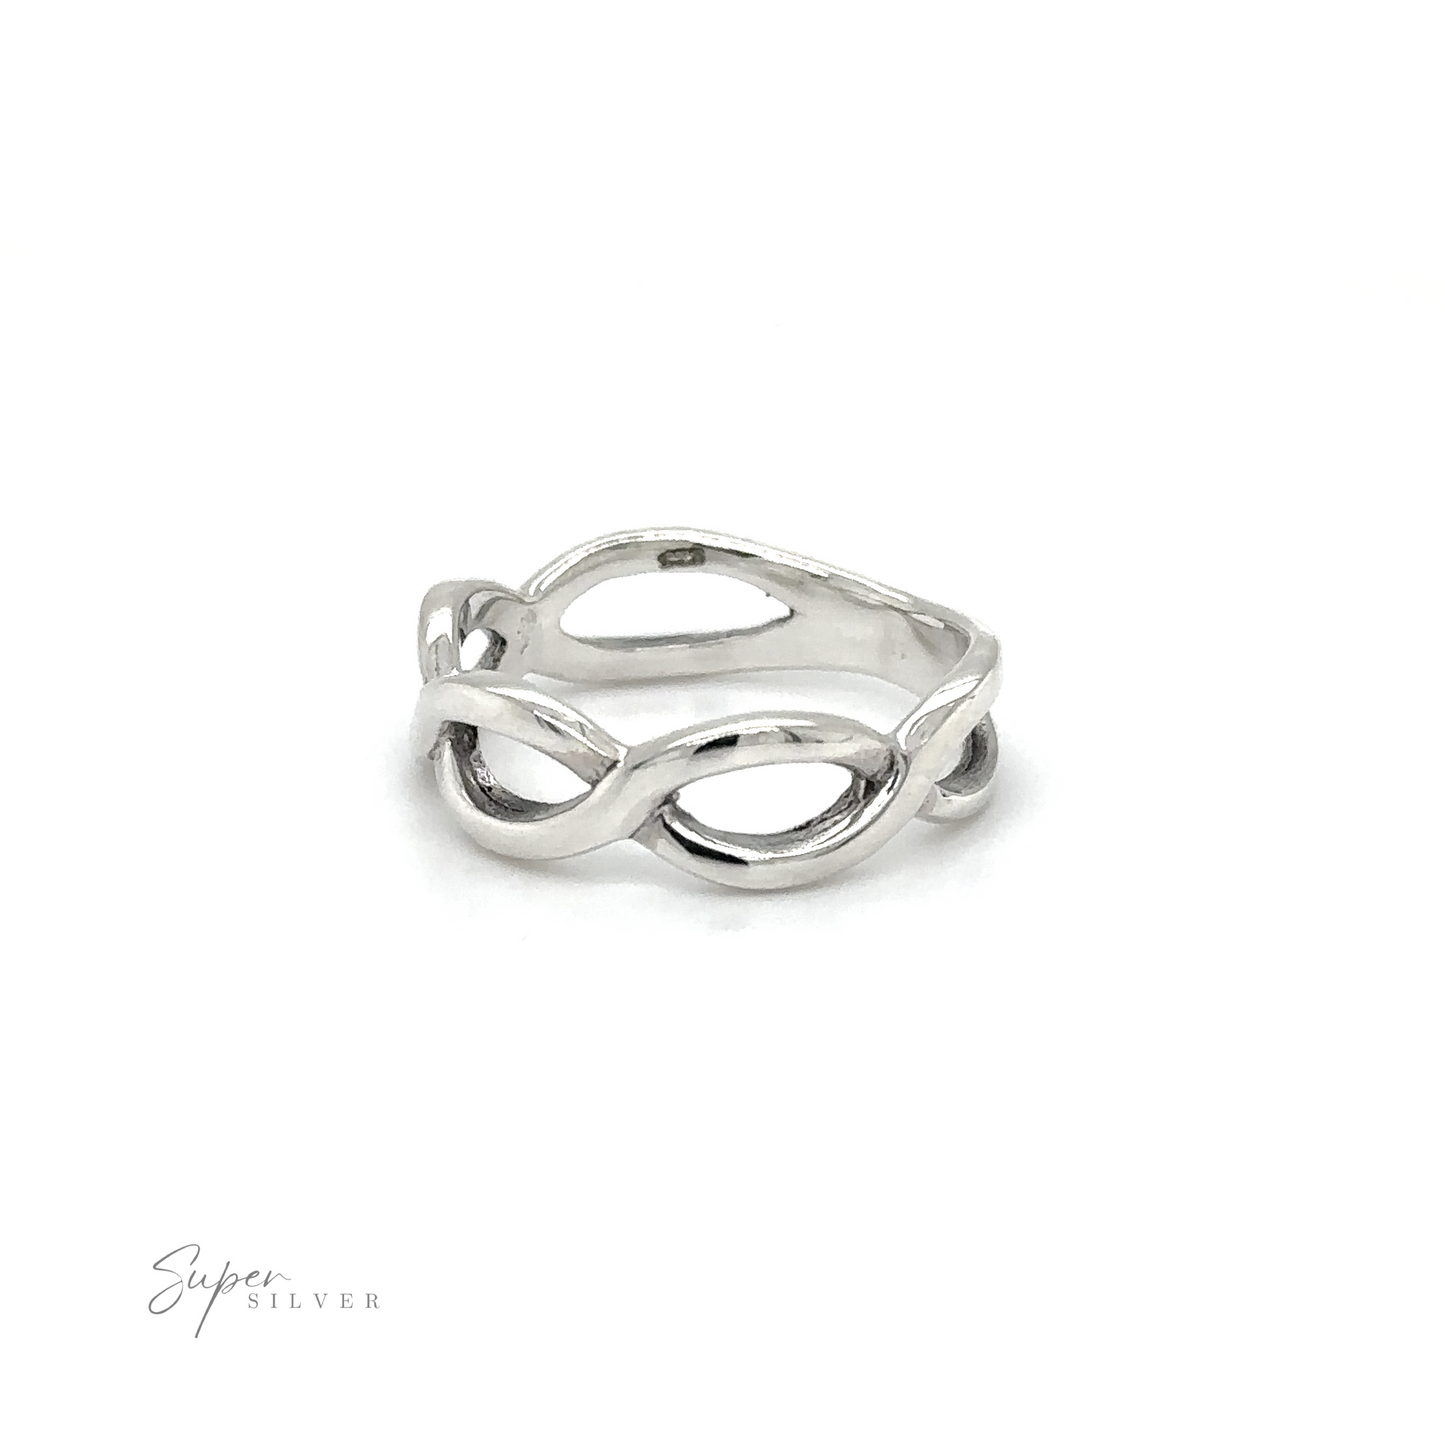 A .925 Sterling Silver Twisted Silver Band showcasing timeless elegance.